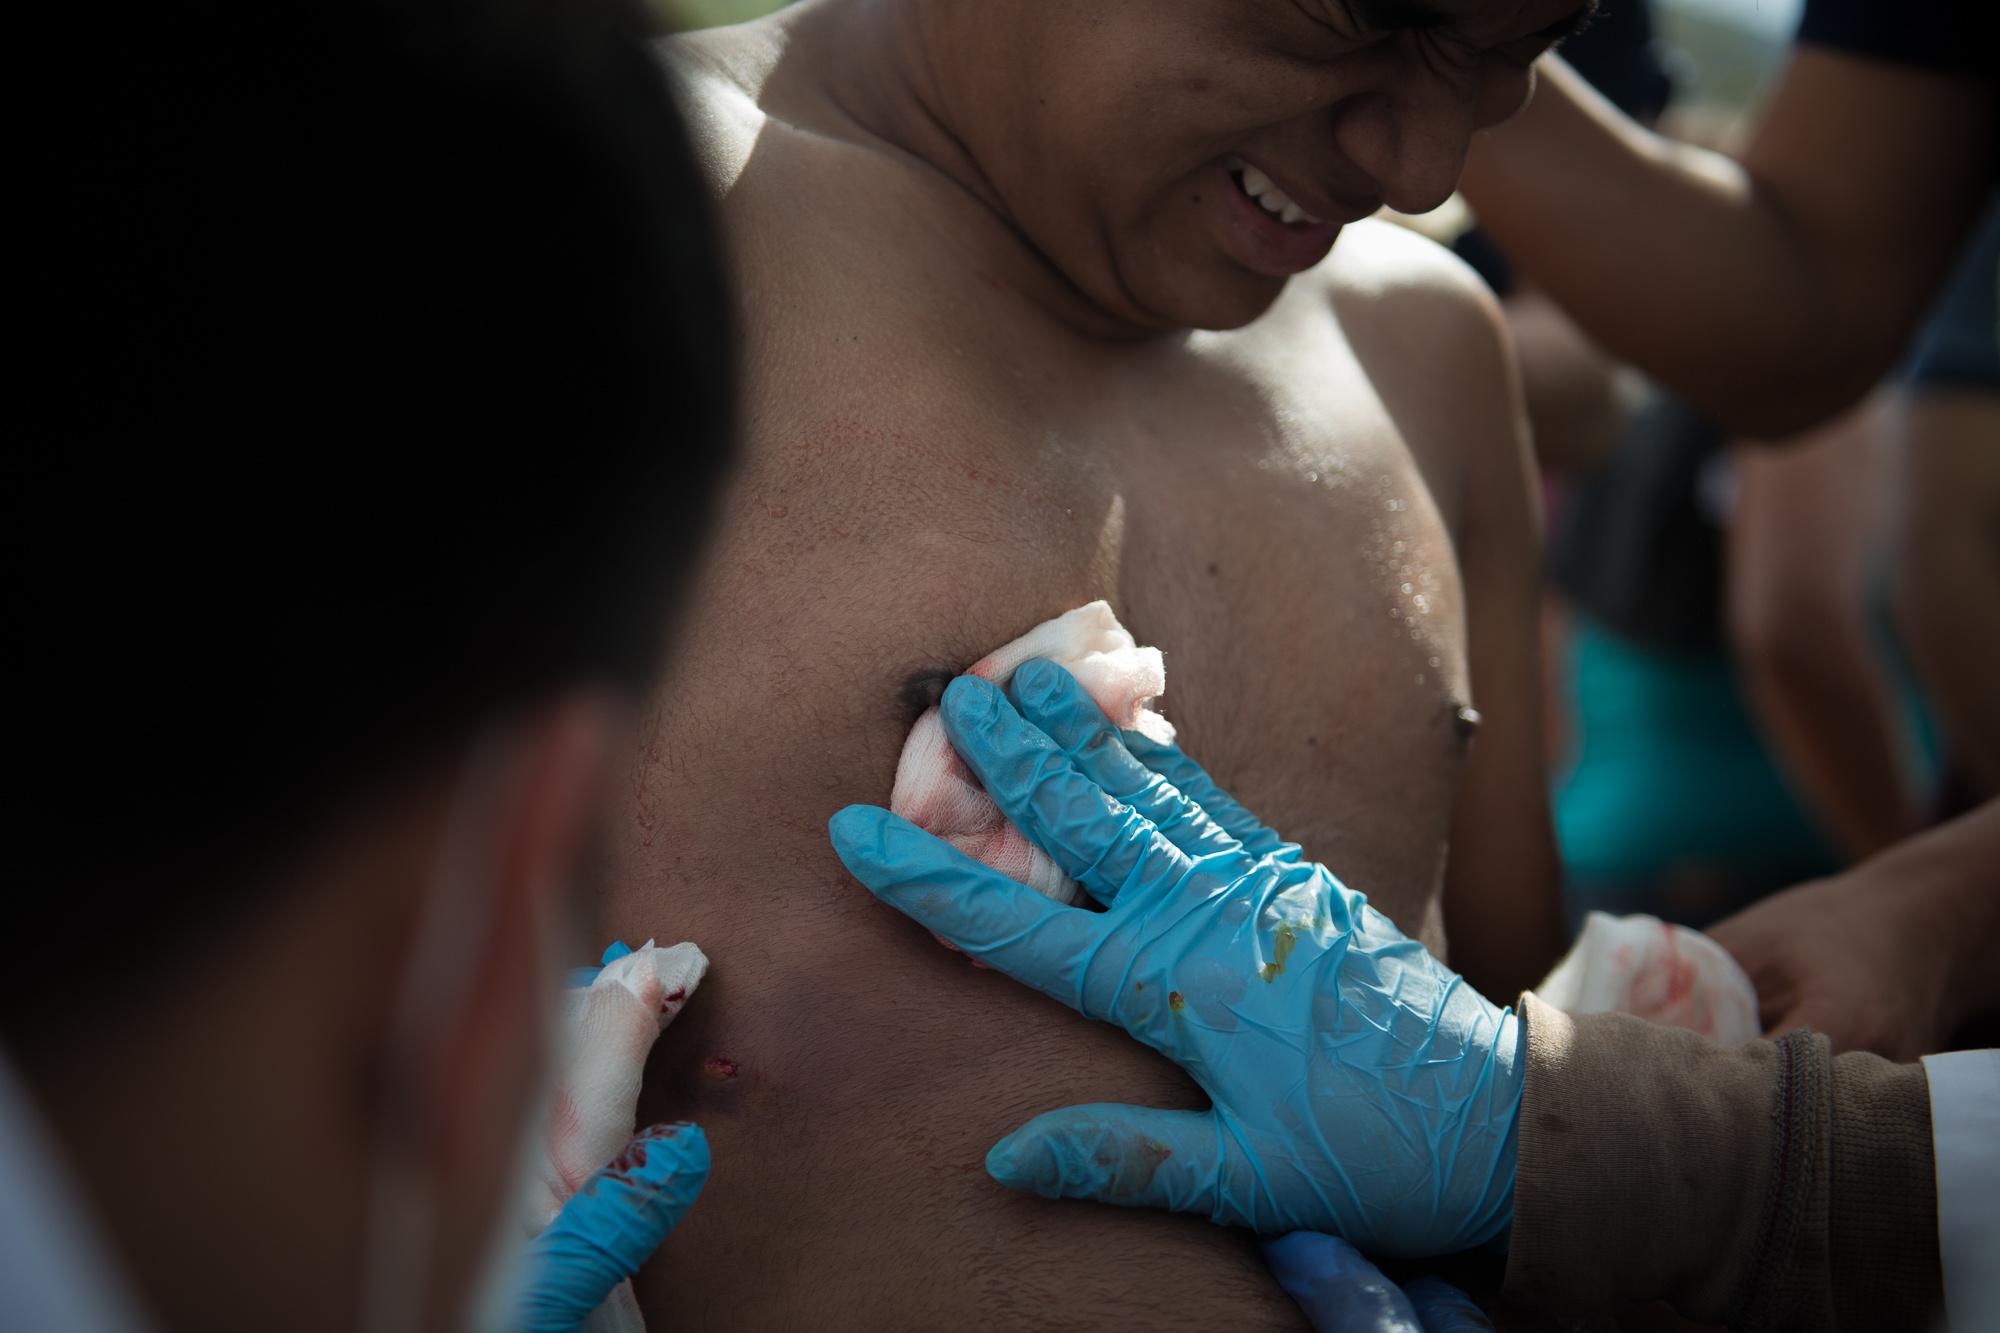 A student is treated for shotgun shell wounds outside the cathedral in Managua following clashes with police. Un estudiante recibe tratamiento por...